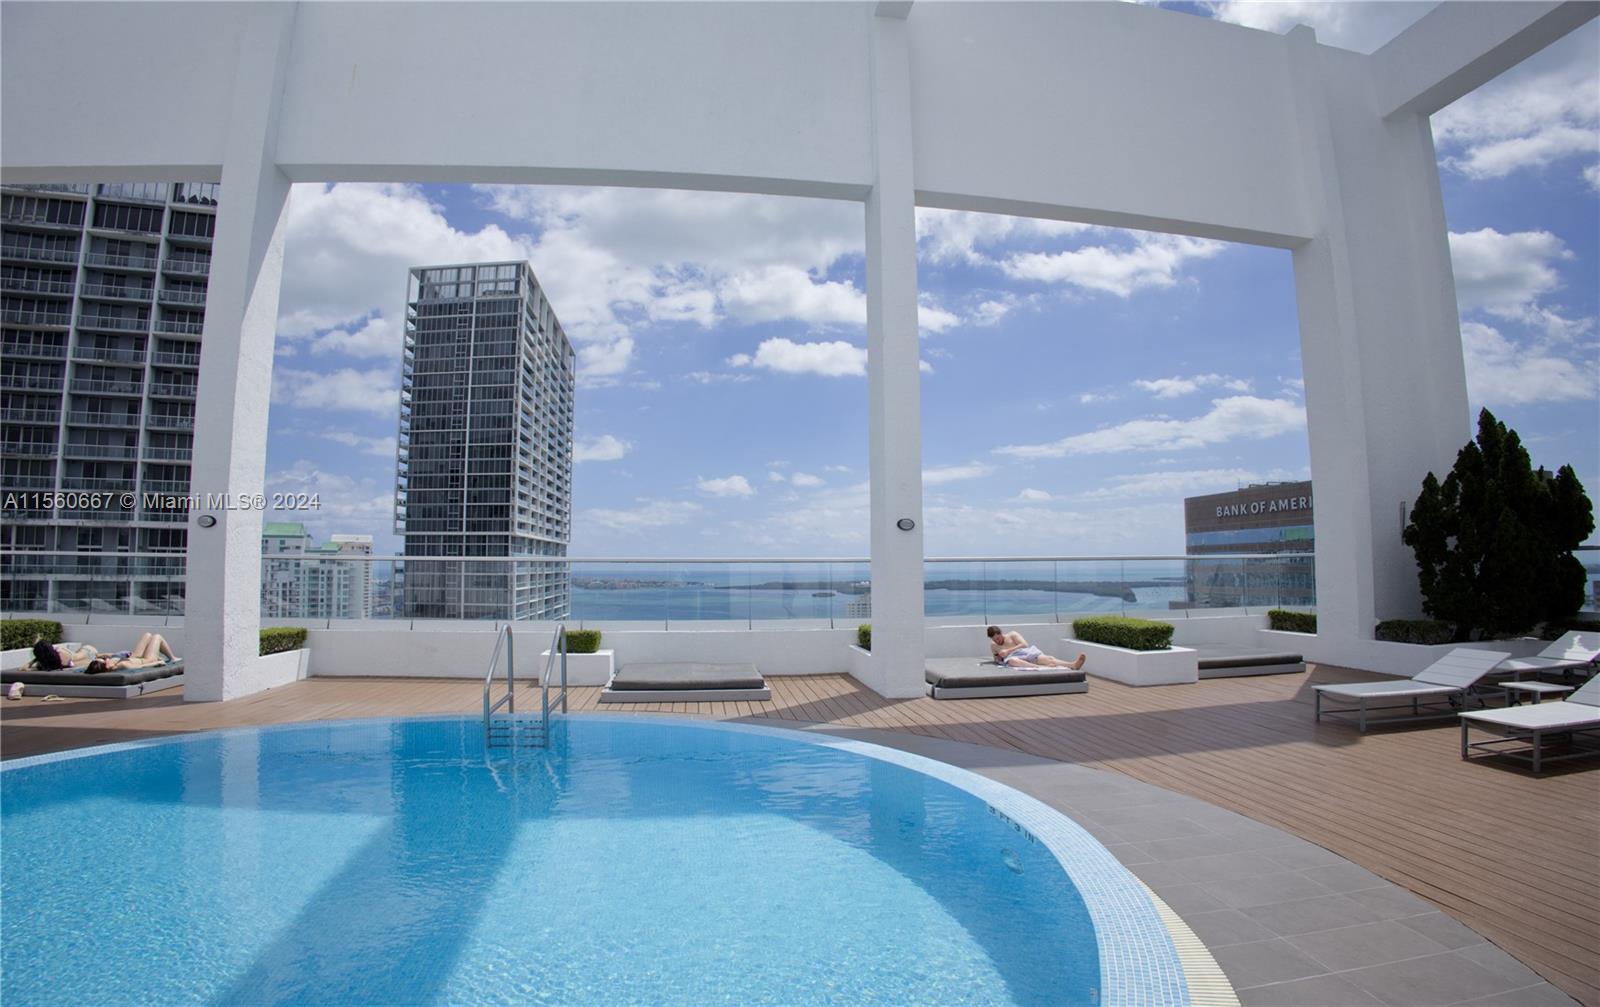 Located at the edge of Brickell and close to Downtown, this apt allows you to live a car free lifestyle, while still providing parking for the times you do need your car to leave the neighborhood. Enjoy beautiful views of the Miami River from both bedrooms and the living room. Split floor plan for added privacy. Building has two pools (including a rooftop one) and lots of common area spaces for you to enjoy. The apt very spacious and comfortable. You will not find a better property in this price range anywhere in the area. Cable and Internet included in rent. Available immediately.